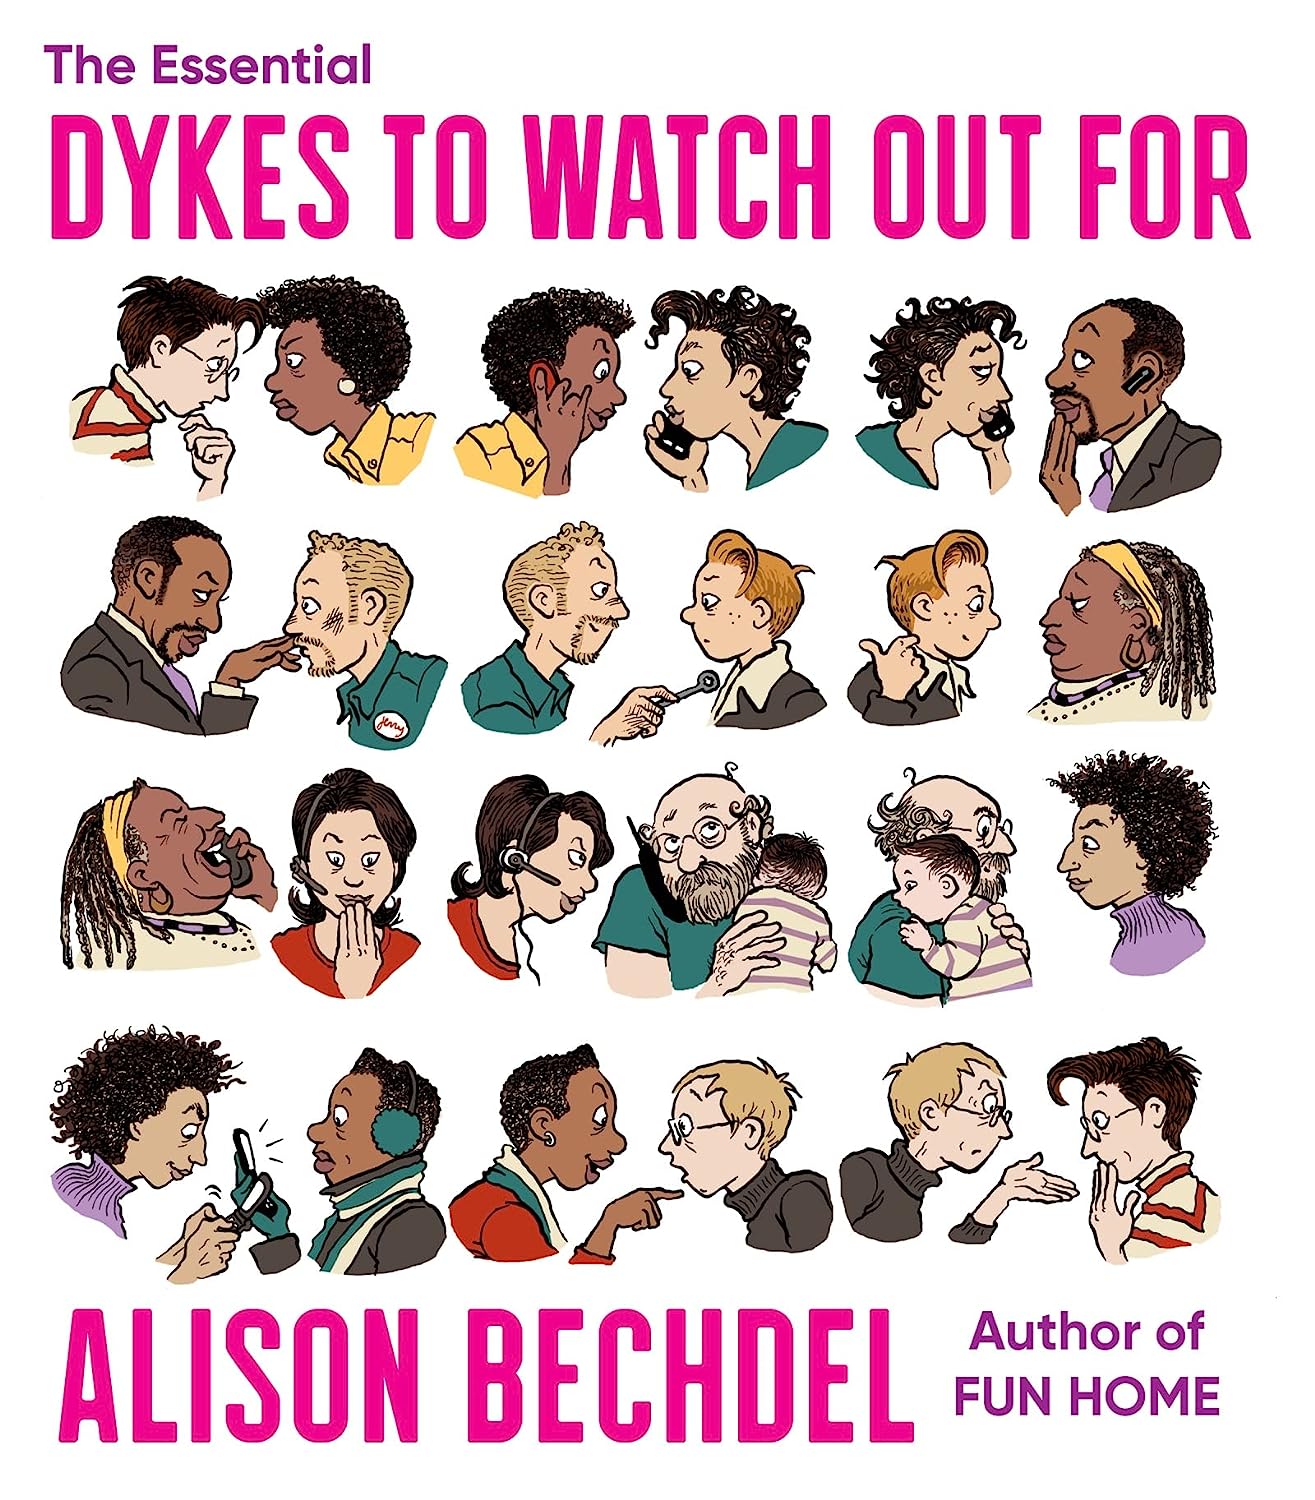 The Essential Dykes to Watch Out For